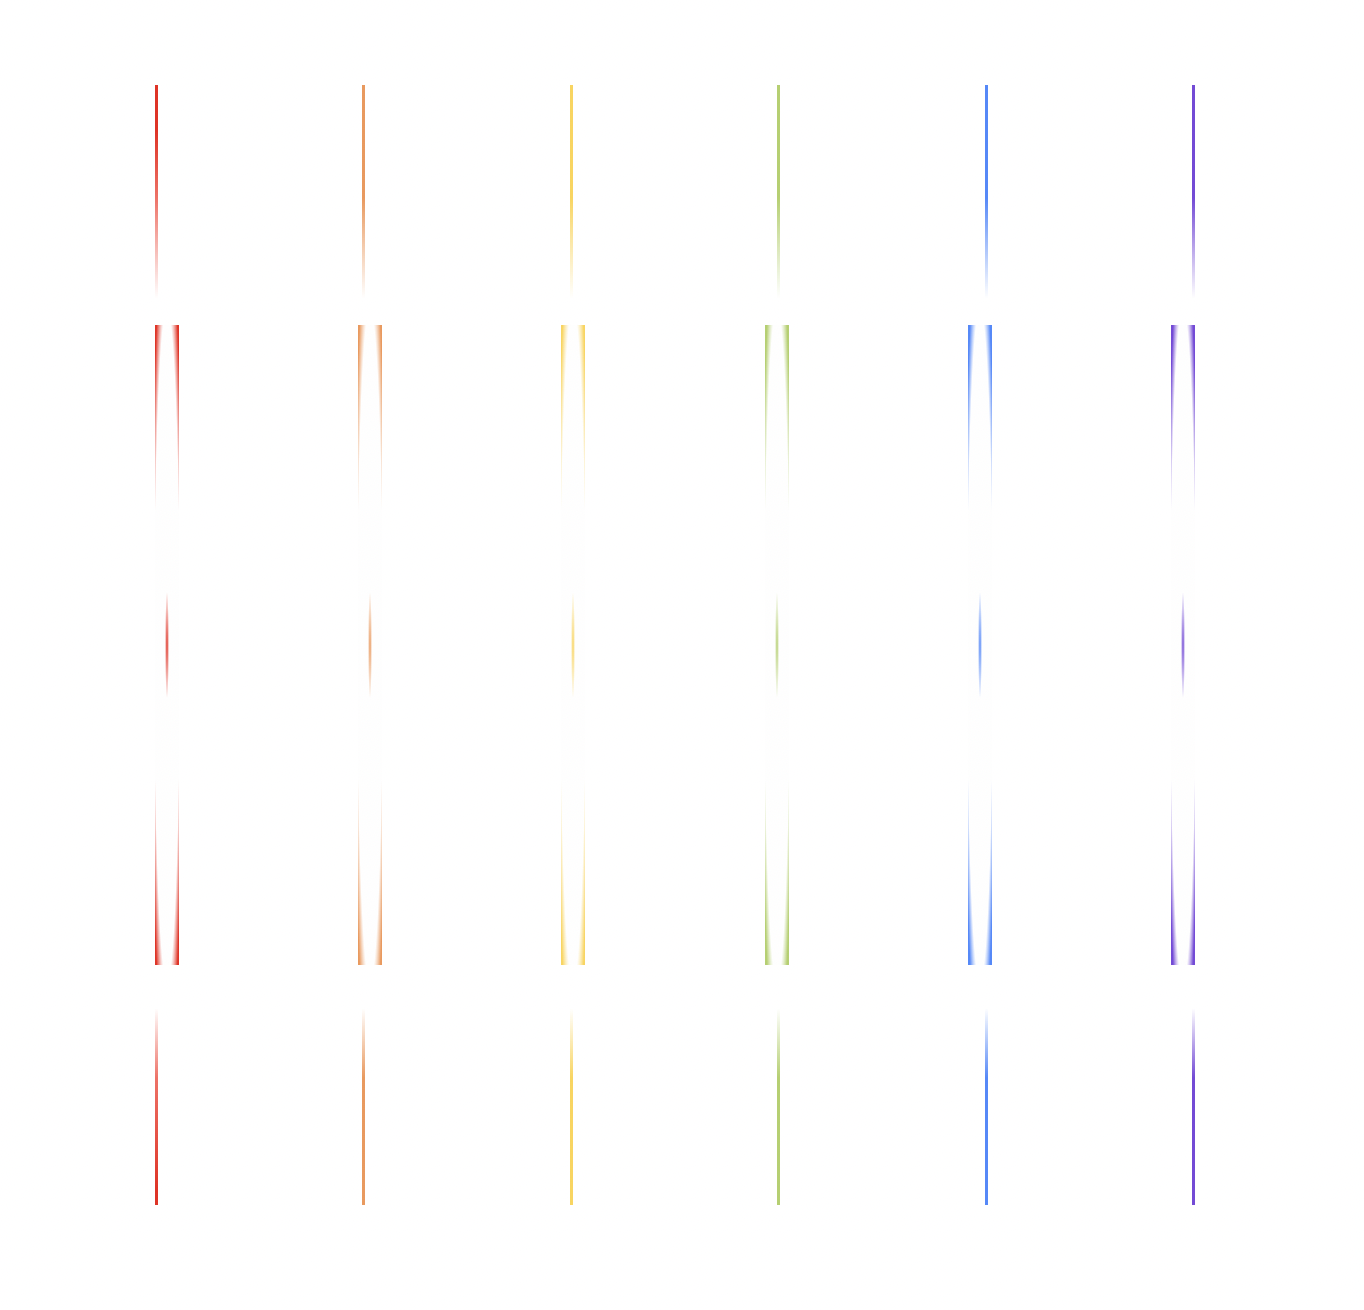 Red, orange, yellow, green, blue, and purple columns of color in equal parts interrupted by nebulous sections of white, creating an optical illusion like effect in the center of the image.